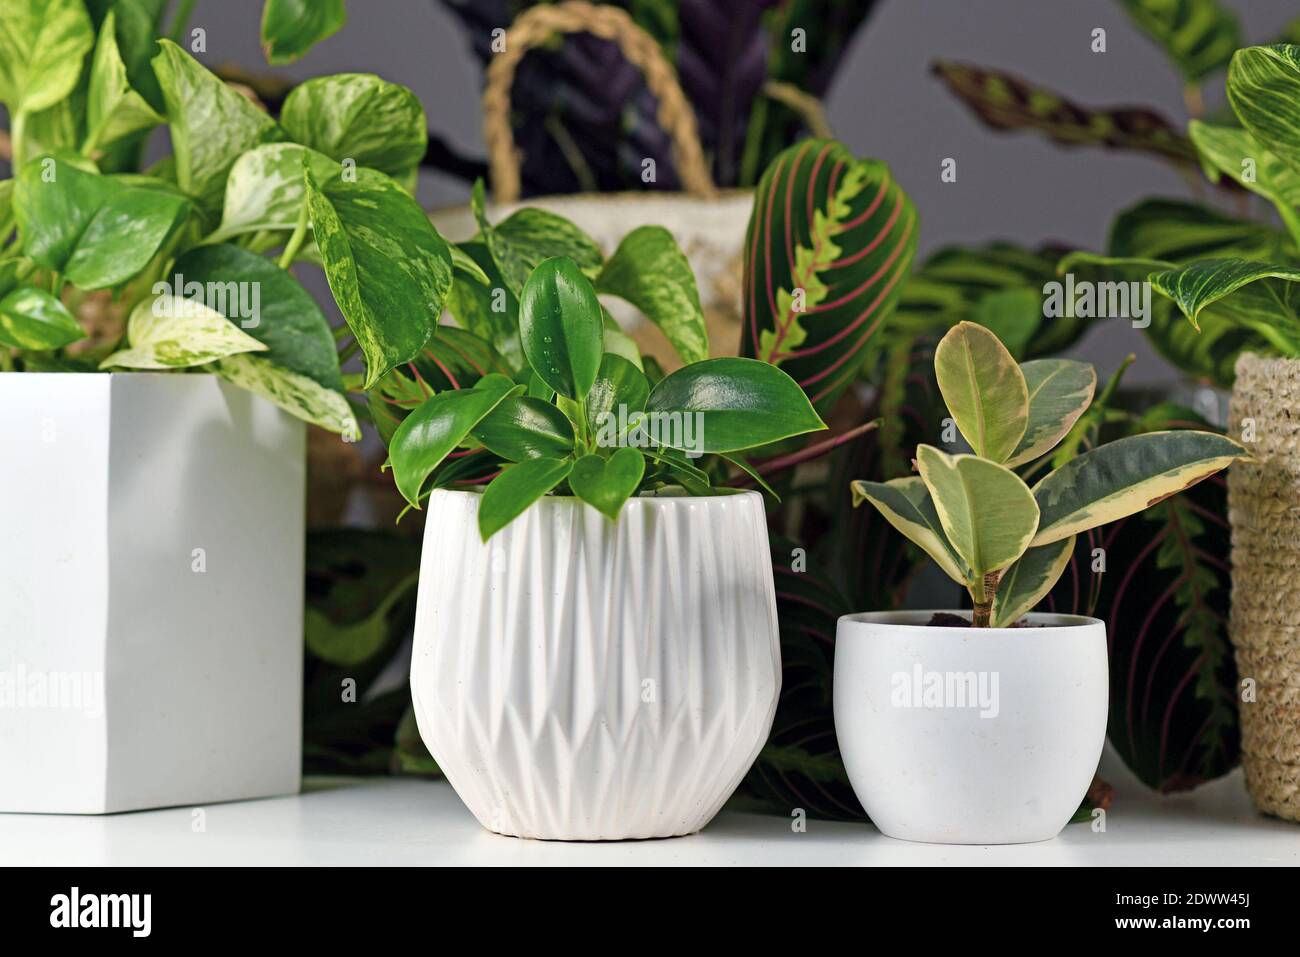 Various indoor houseplants like Philodendron or Ficus in beautiful white flower pots Stock Photo